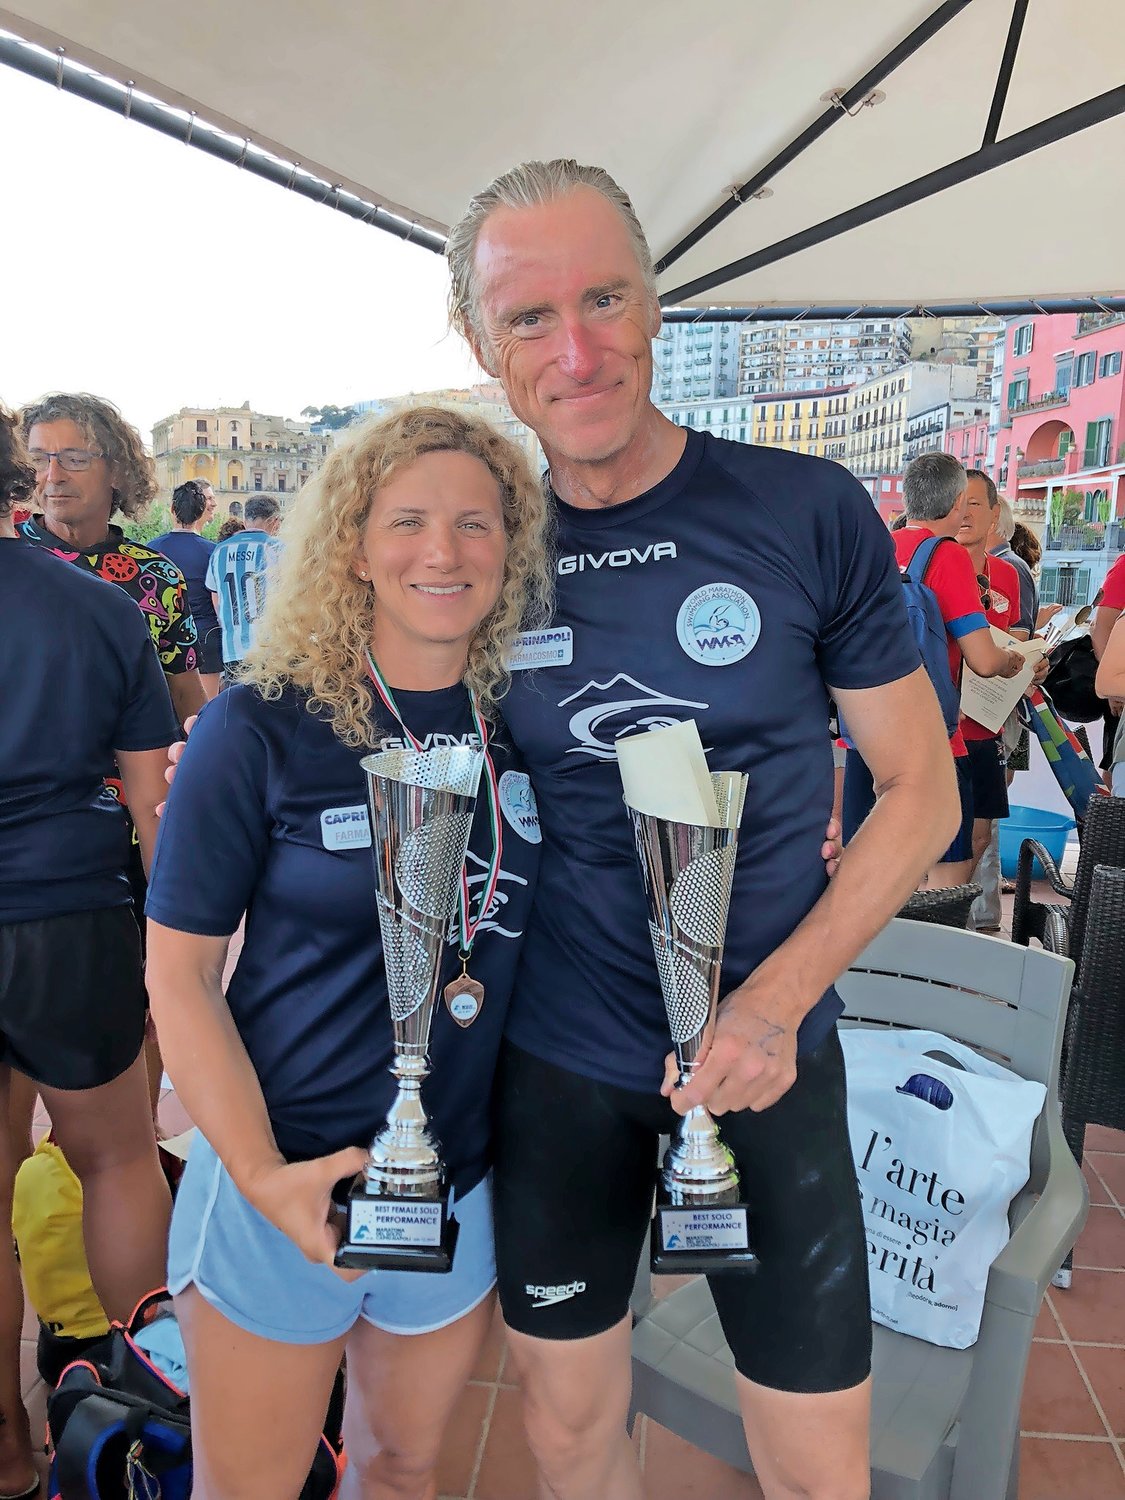 Rockville Centre resident Lori King finished second in the Maratona del Golfo in Italy on July 12. First-place finisher Olivier Delfosse, of Belgium, joined her.